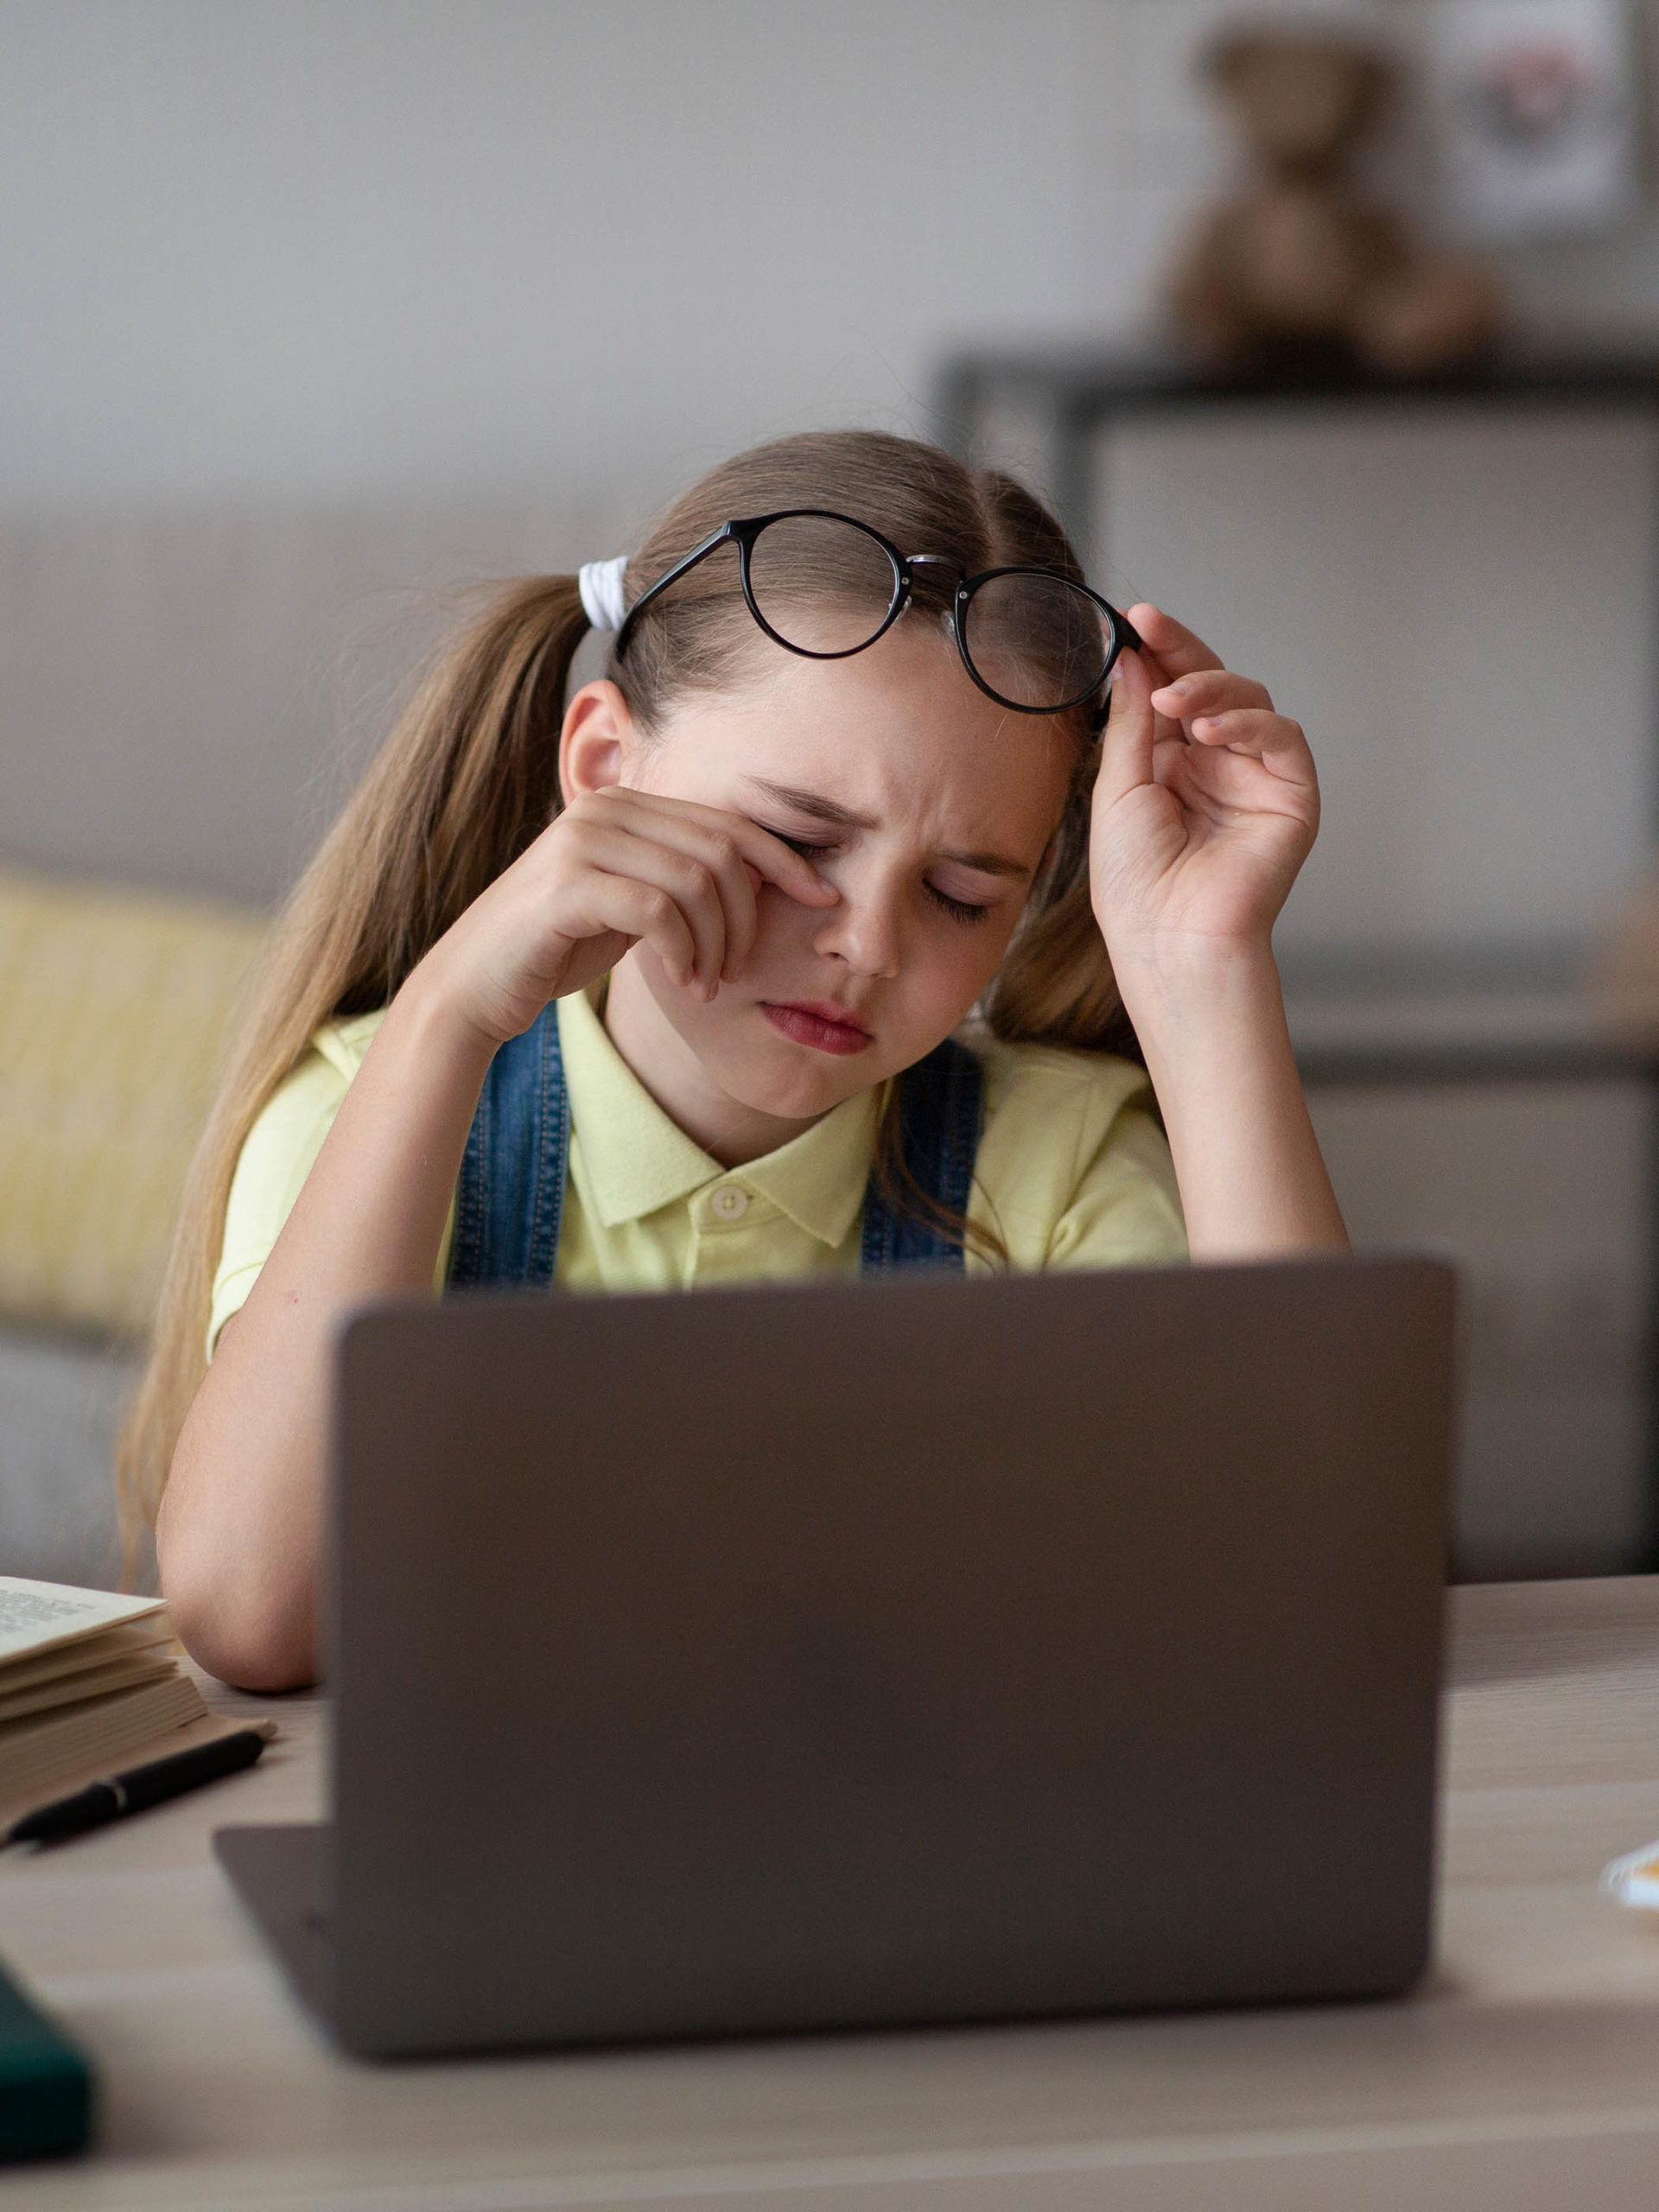 cranky girl taking off glasses, rubbing her eyes, sitting at table working on laptop